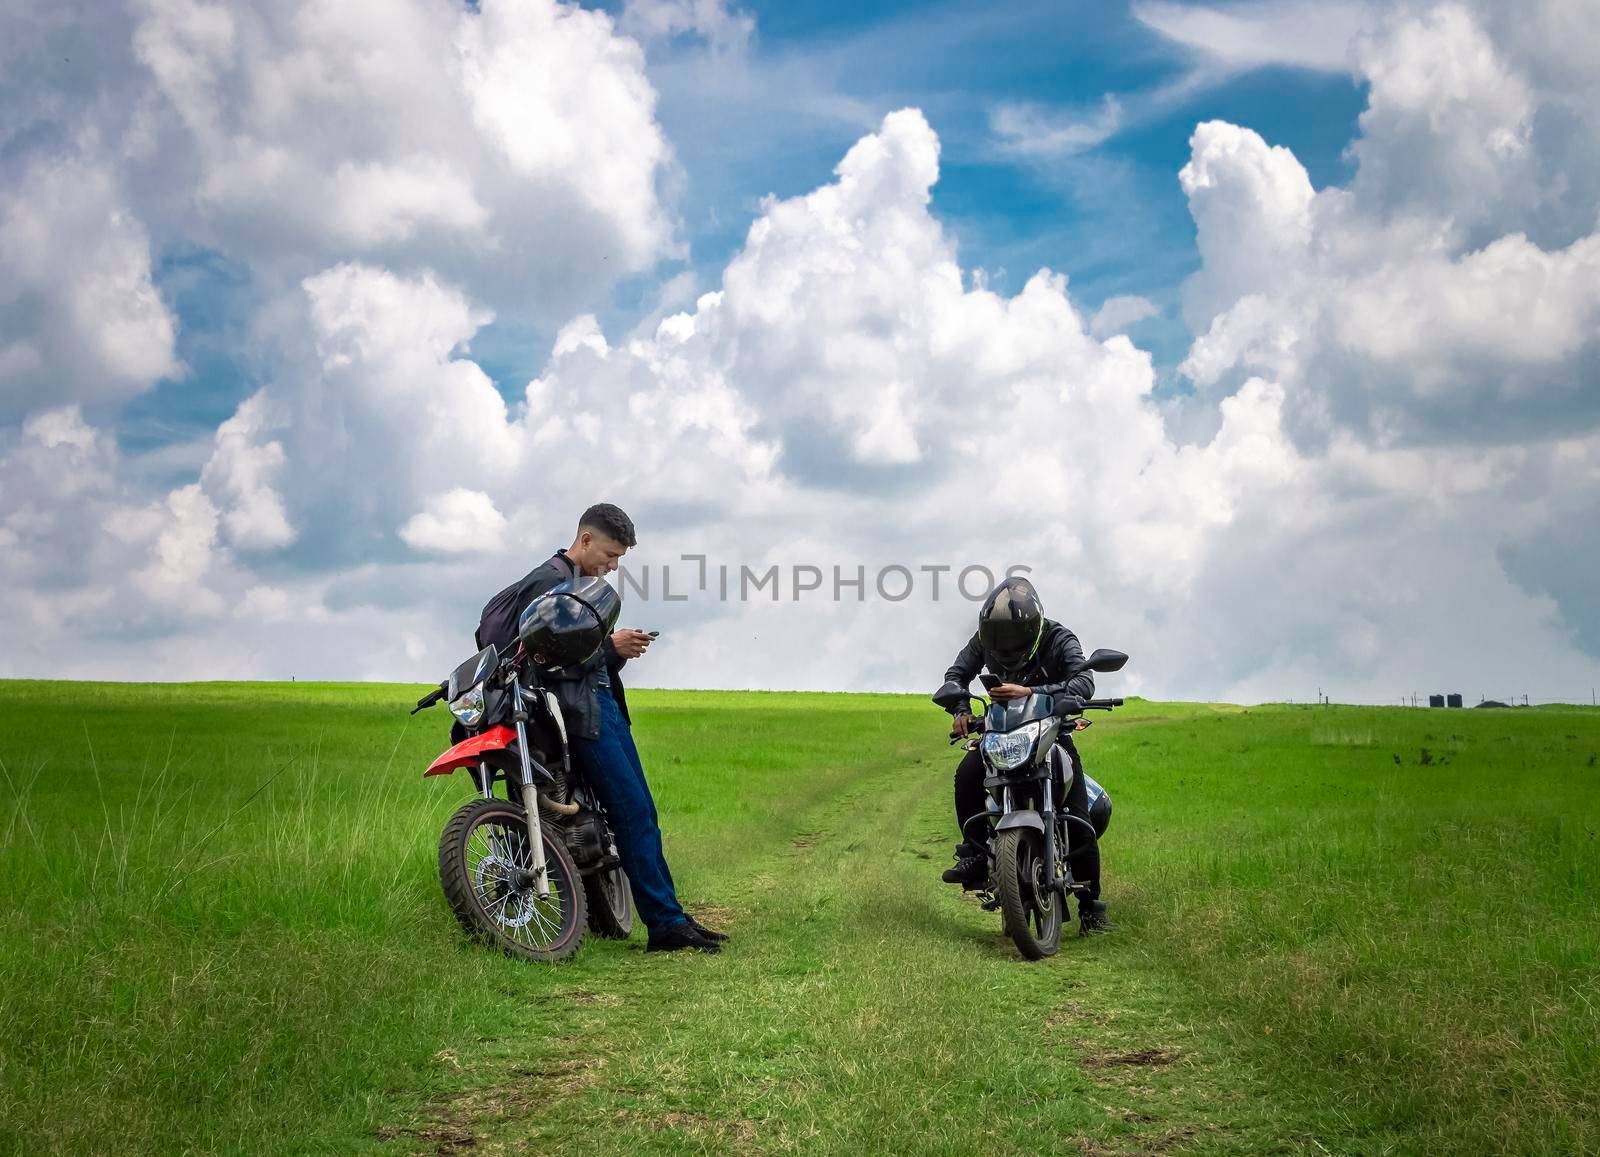 Two men with their motorcycles parked chatting in the field, two young motorcyclists in the field, two men on motorcycles on a beautiful country road, young motorcyclists parked on a road by isaiphoto